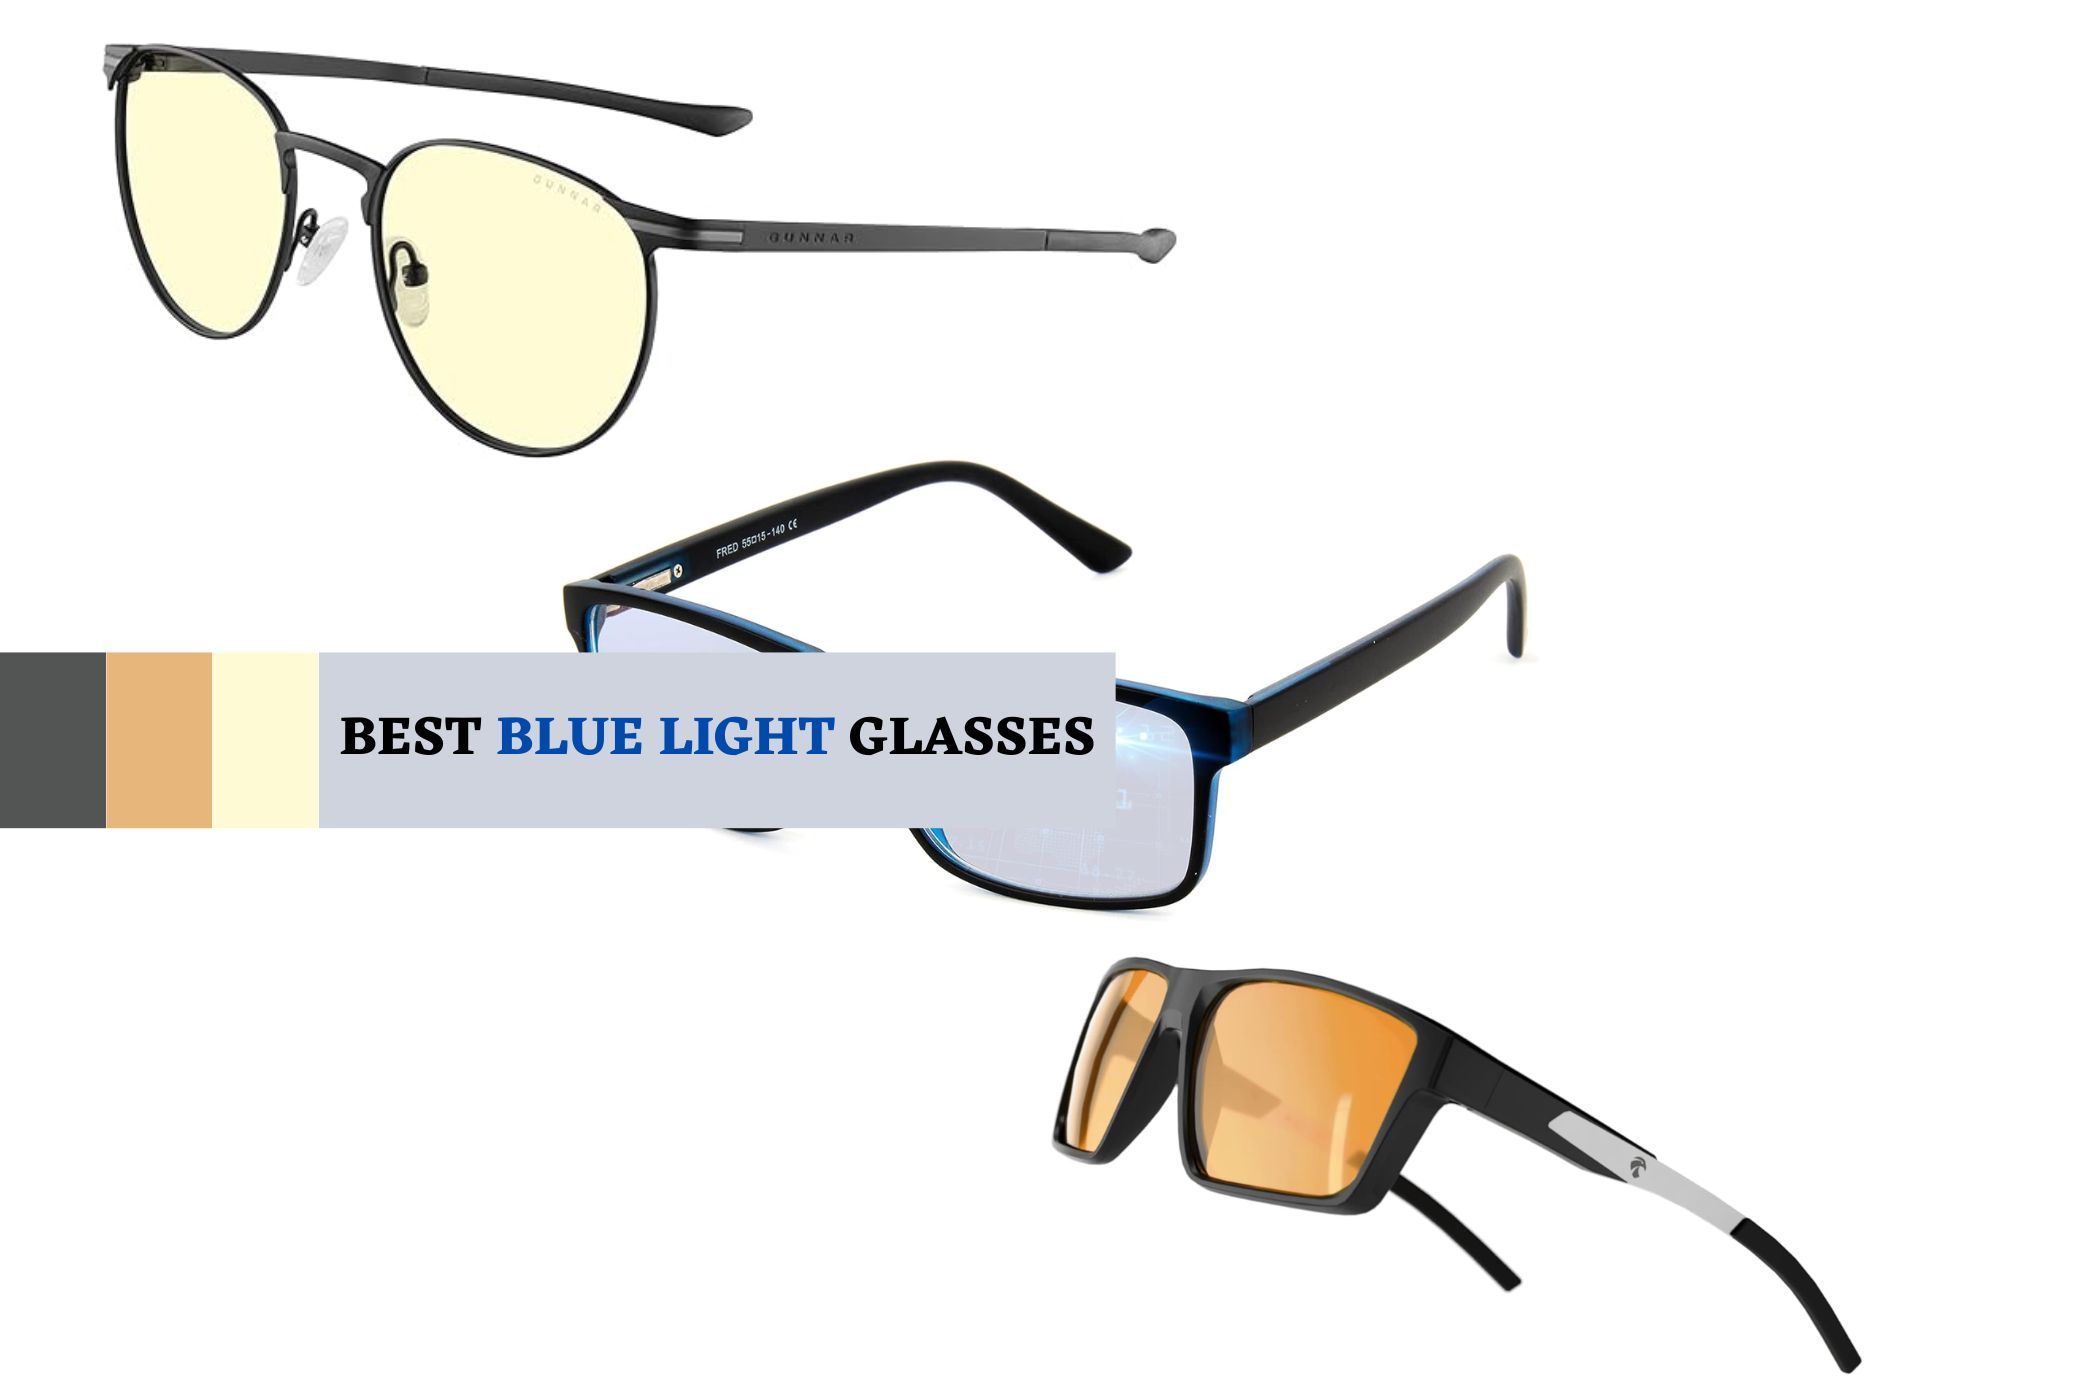 Best blue light glasses featured image